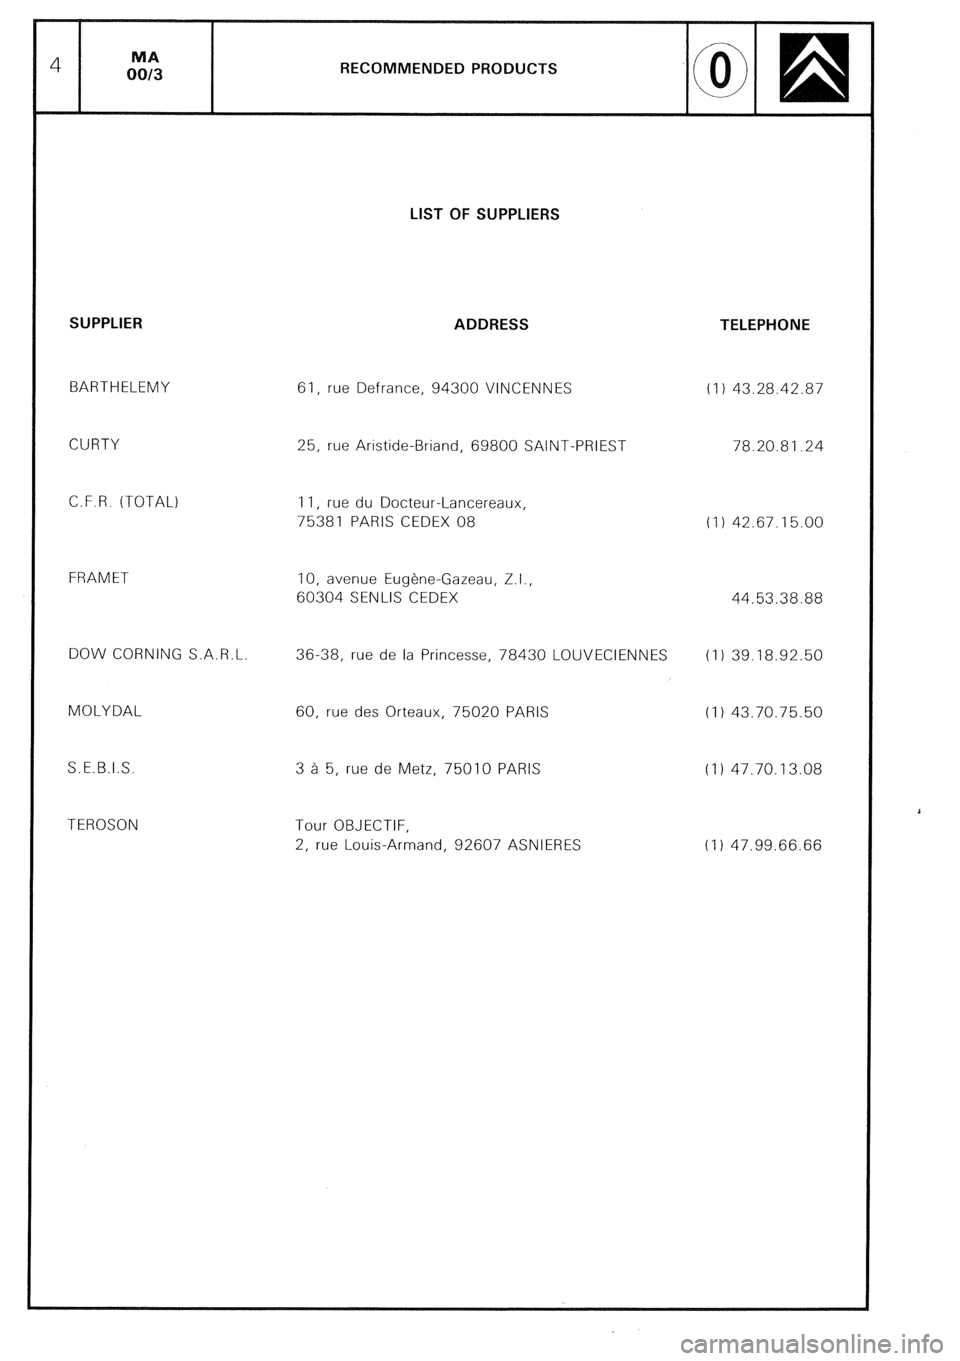 CITROEN CX 1988  Service Manual RECOMMENDED PRODUCTS 
LIST OF SUPPLIERS 
SUPPLIER 
BARTHELEMY 
CURTY 
C.F.R. (TOTAL) 
FRAMET 
DOW CORNING S.A.R.L 
MOLYDAL 
S.E.B.I.S. 
TEROSON ADDRESS 61, rue Defiance, 94300 VINCENNES 
25, rue Arist